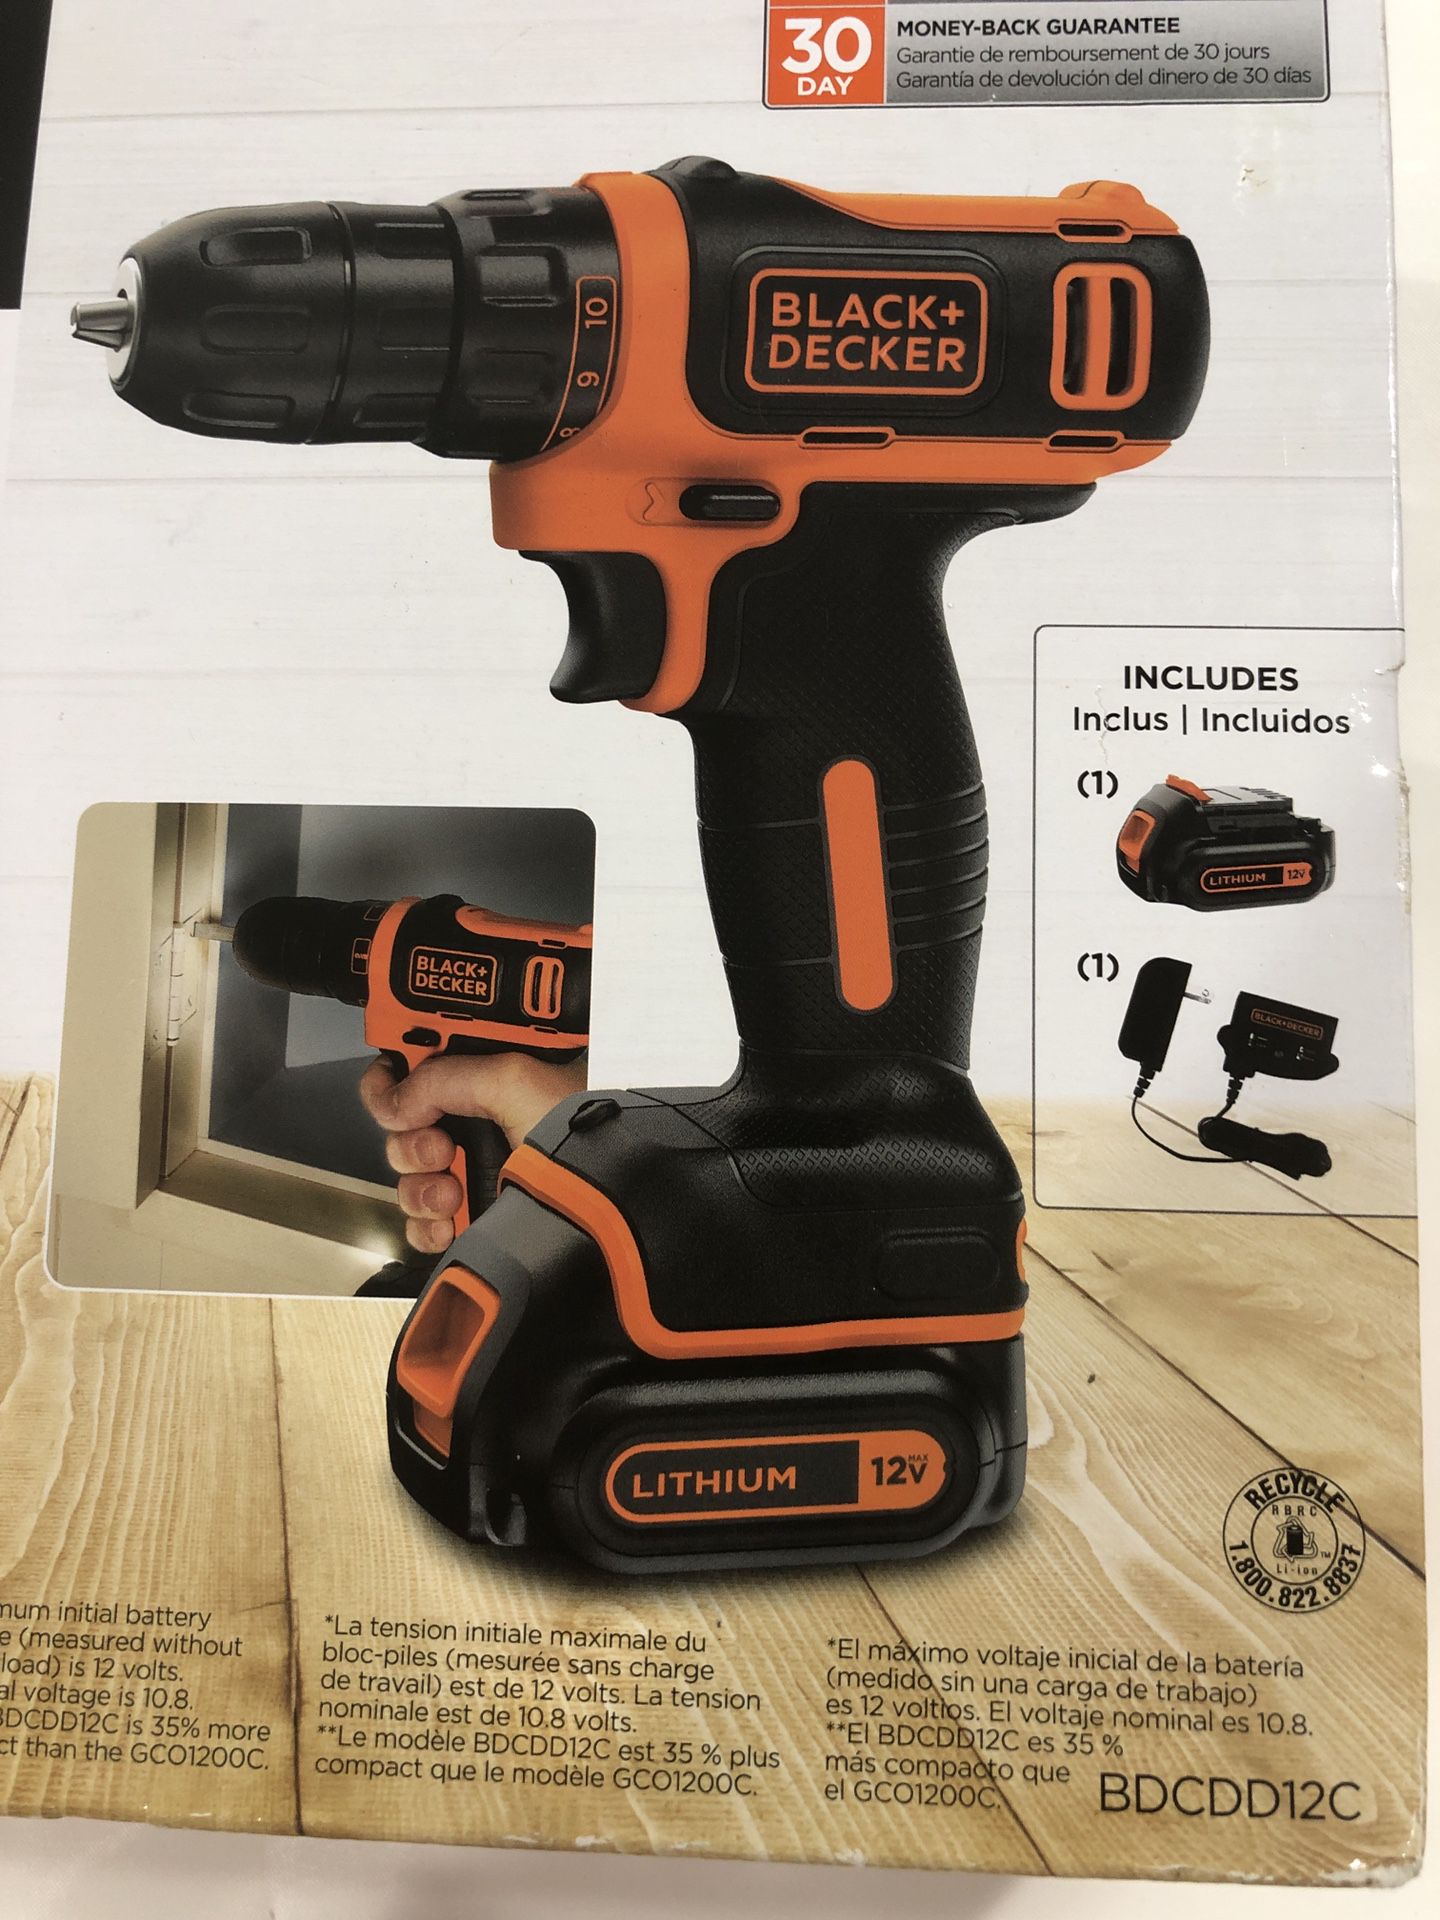 BLACK+DECKER BDCDD12C 12V Cordless Drill/Driver -Black With Battery And Charger